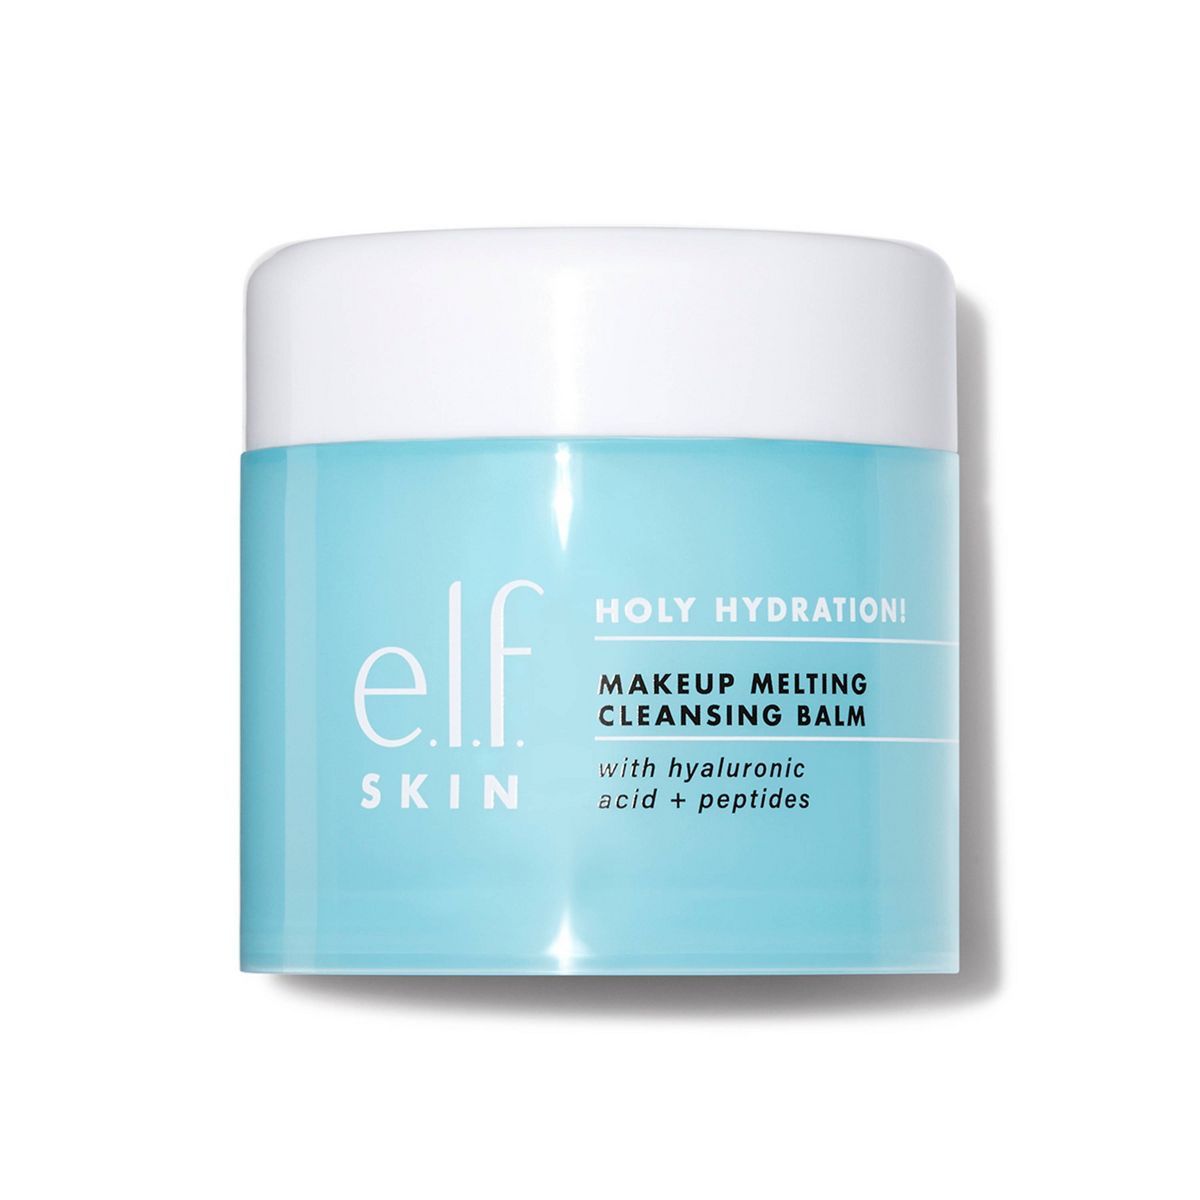 e.l.f. Holy Hydration Makeup Melting Scented Cleansing Balm - 2oz | Target